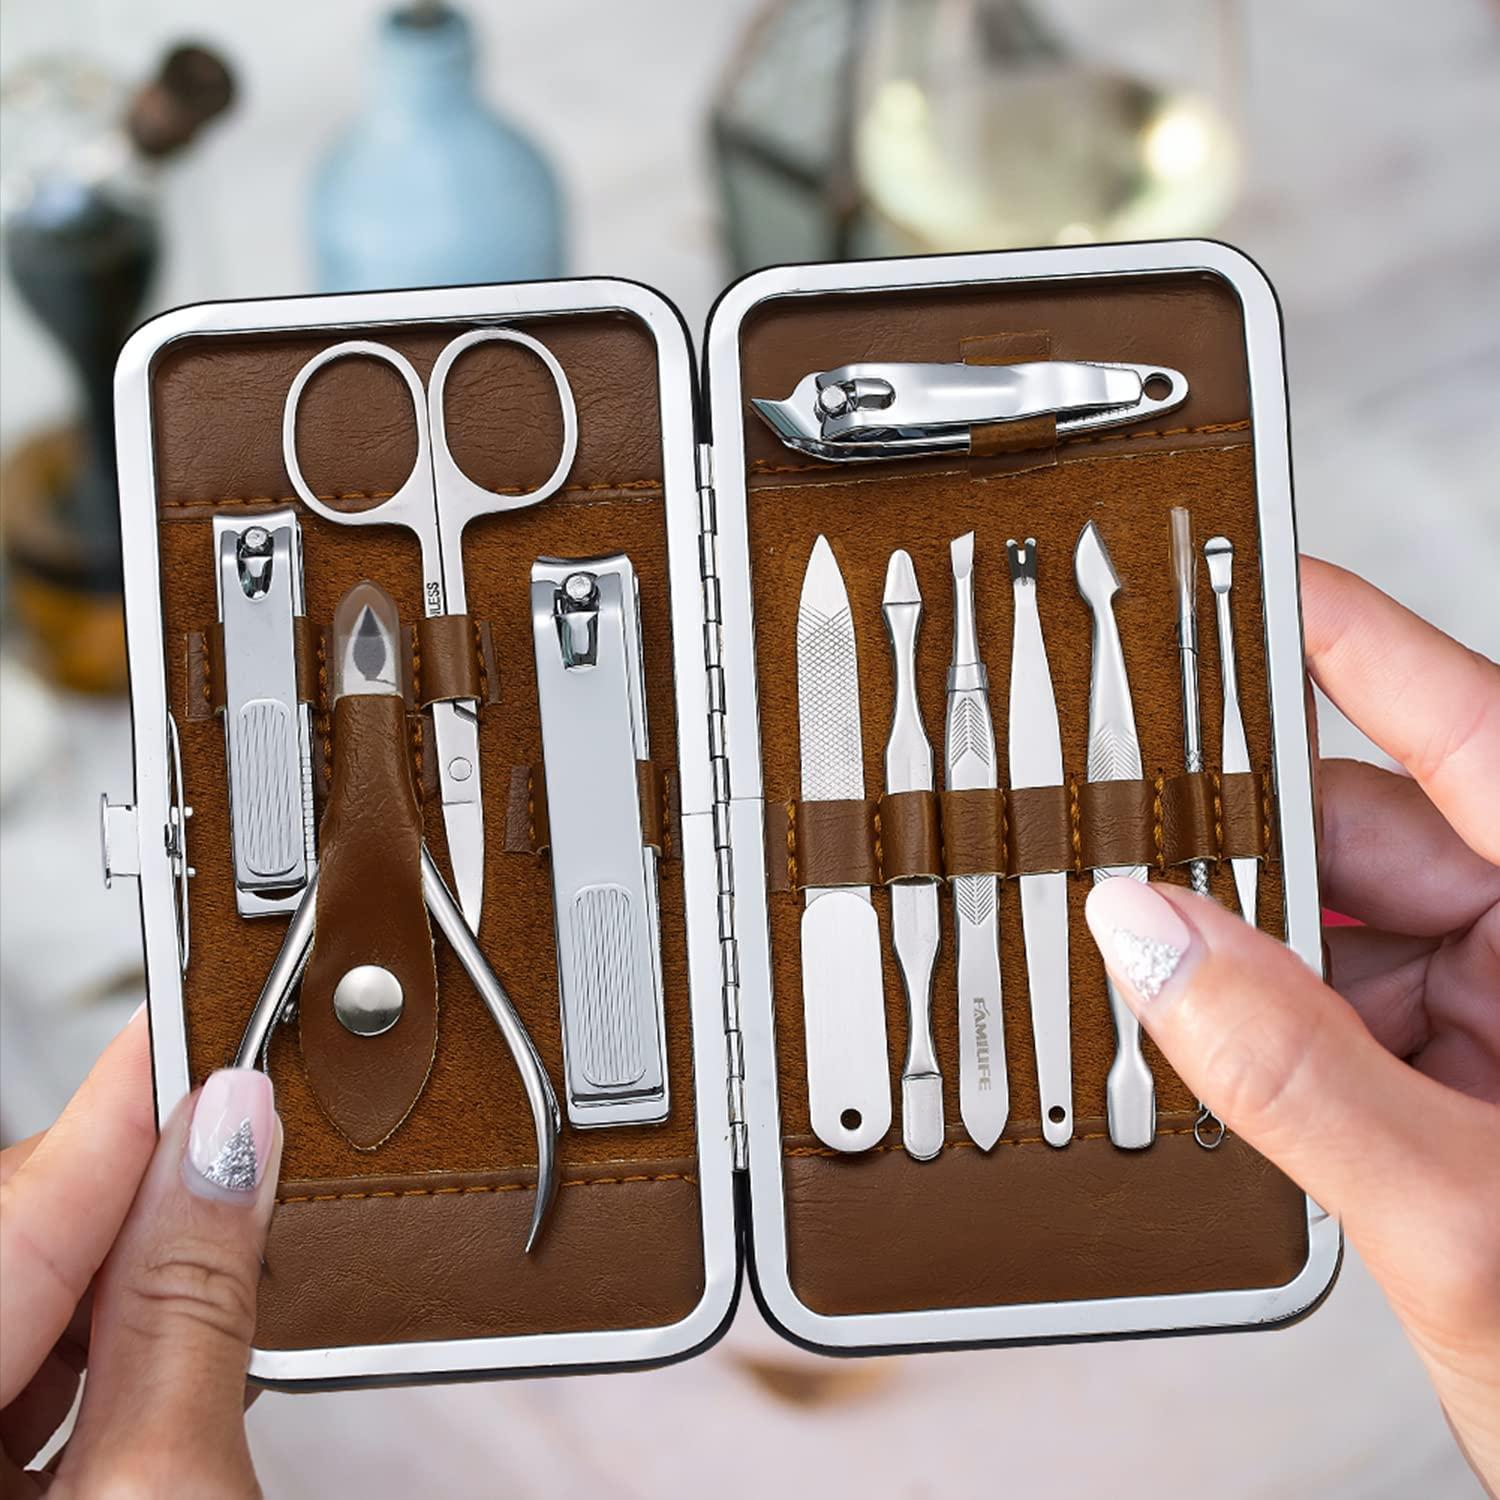 KIRA 10 Pcs Manicure Set Nail Clippers,Stainless Steel With Peeling Knife  (Rose Gold) - Price in India, Buy KIRA 10 Pcs Manicure Set Nail Clippers,Stainless  Steel With Peeling Knife (Rose Gold) Online